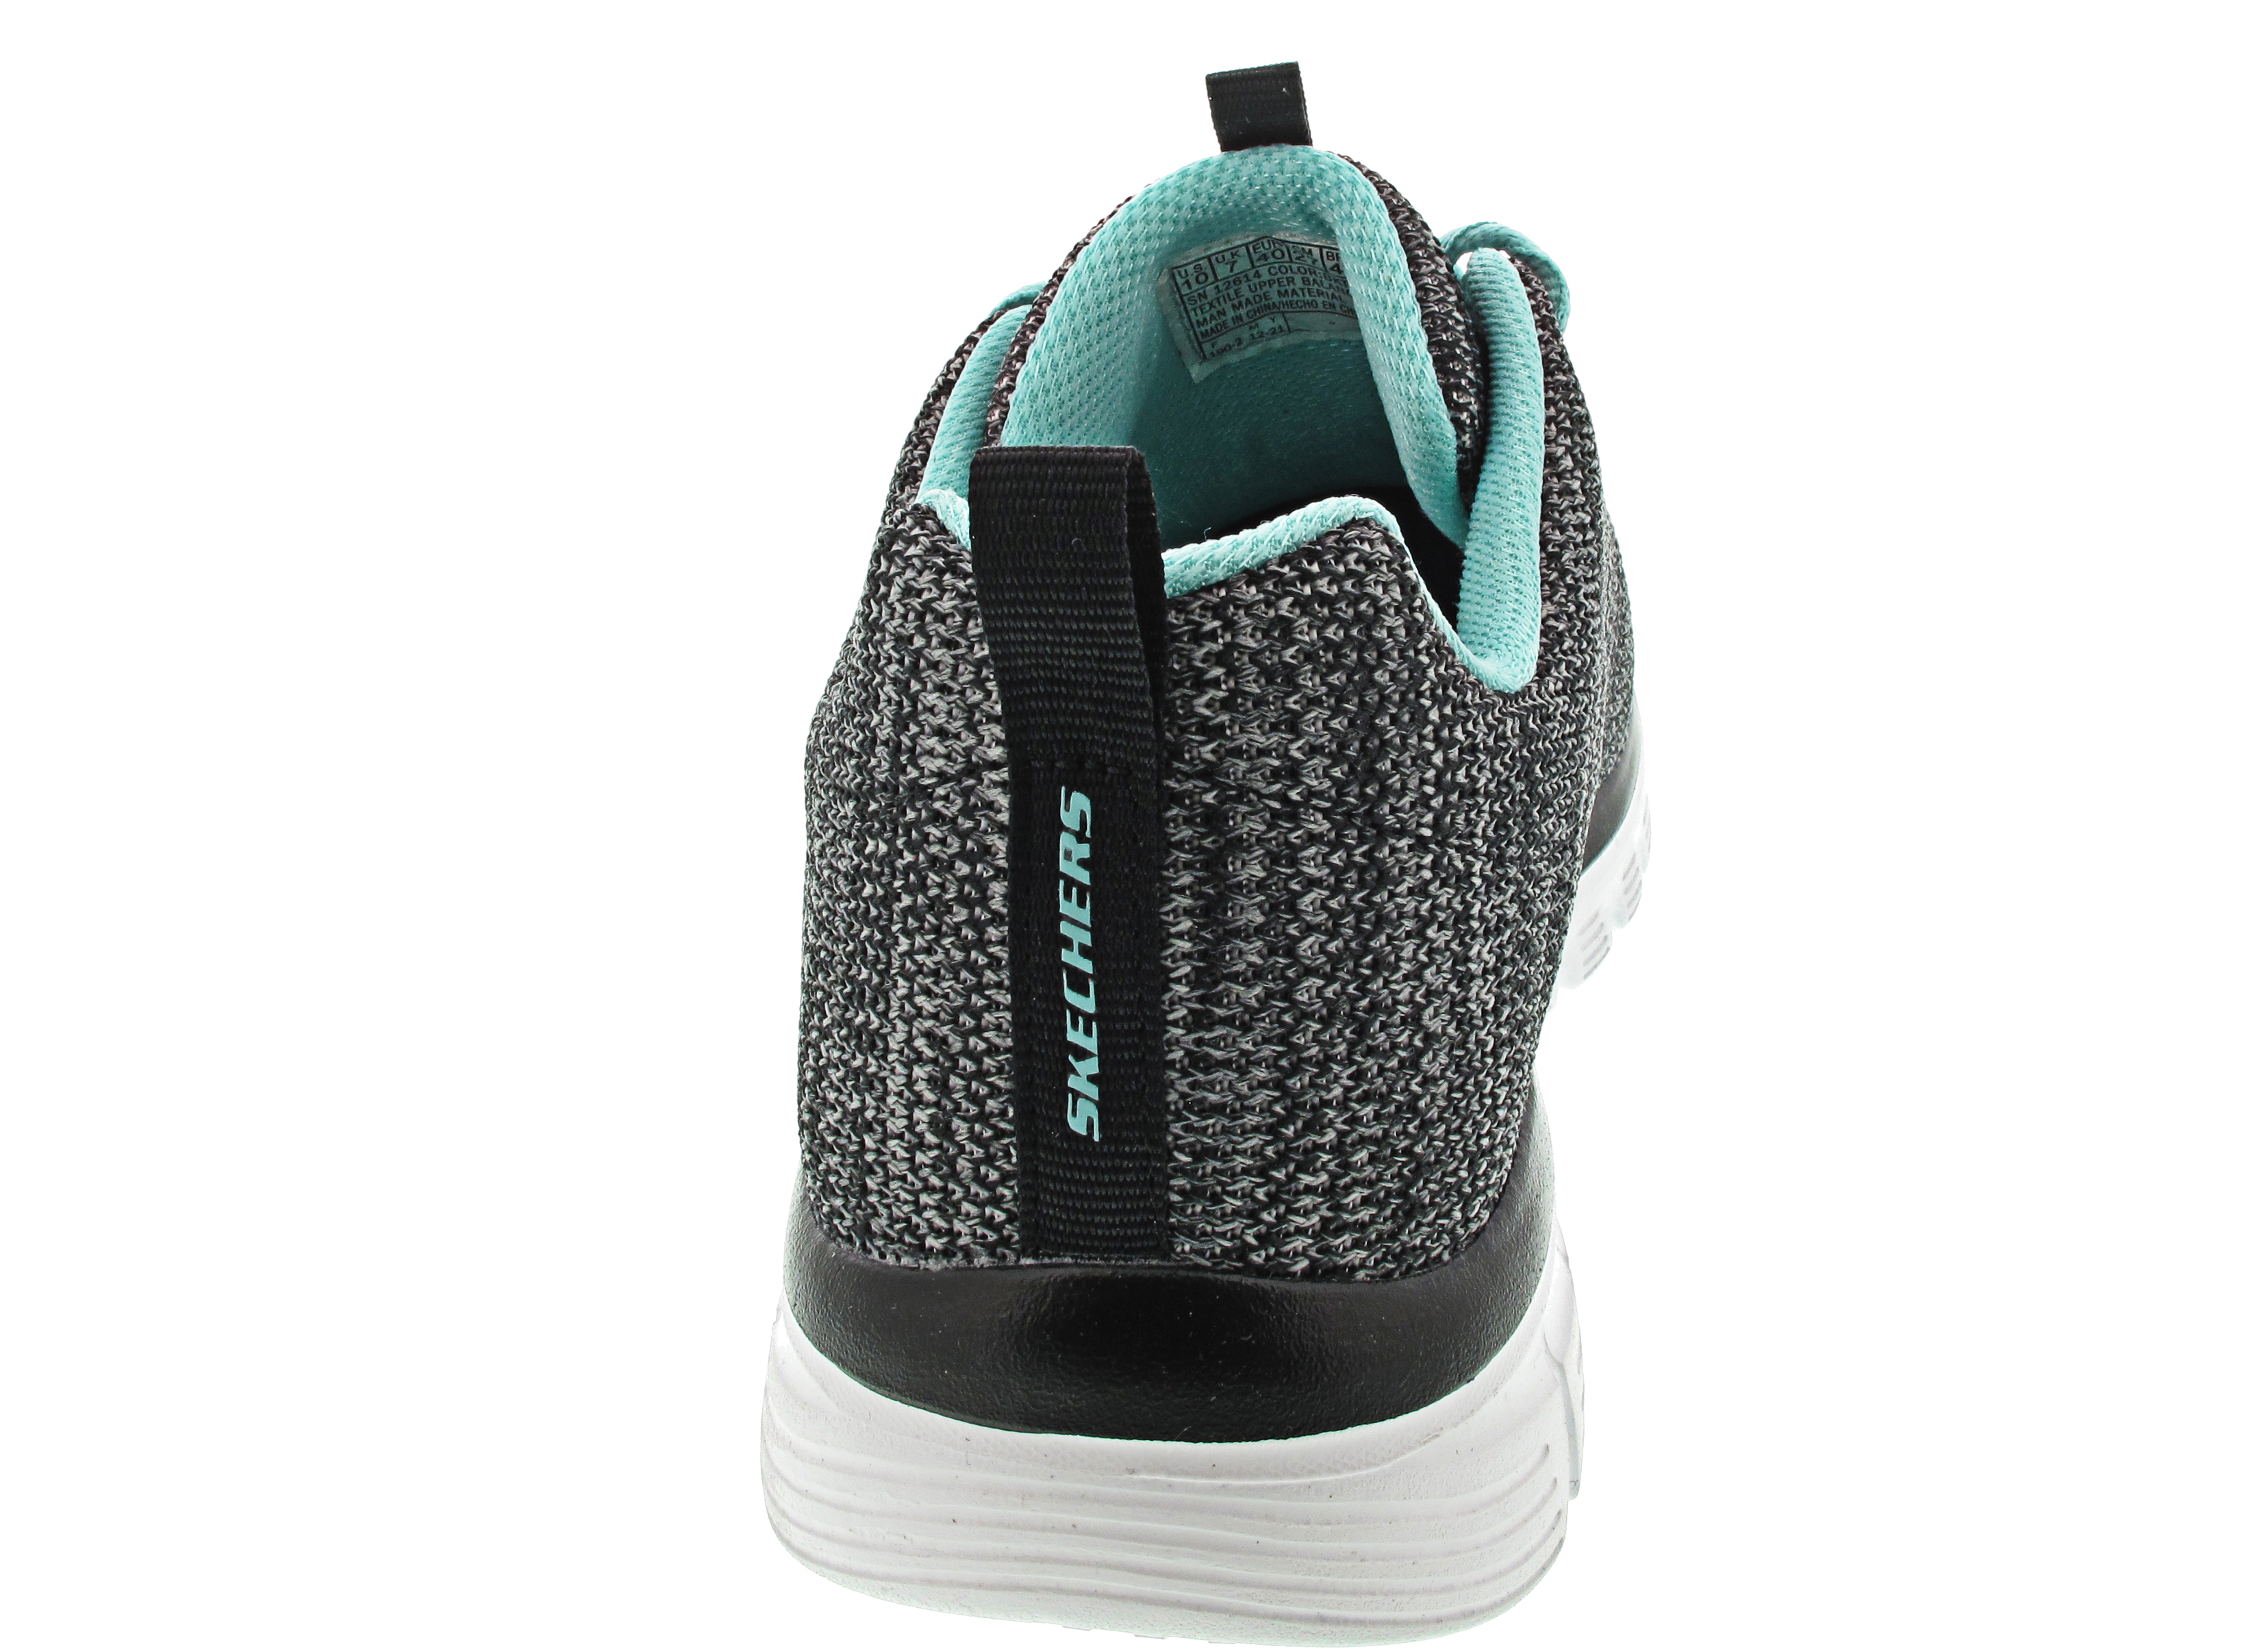 Skechers Graceful Twisted Fortune